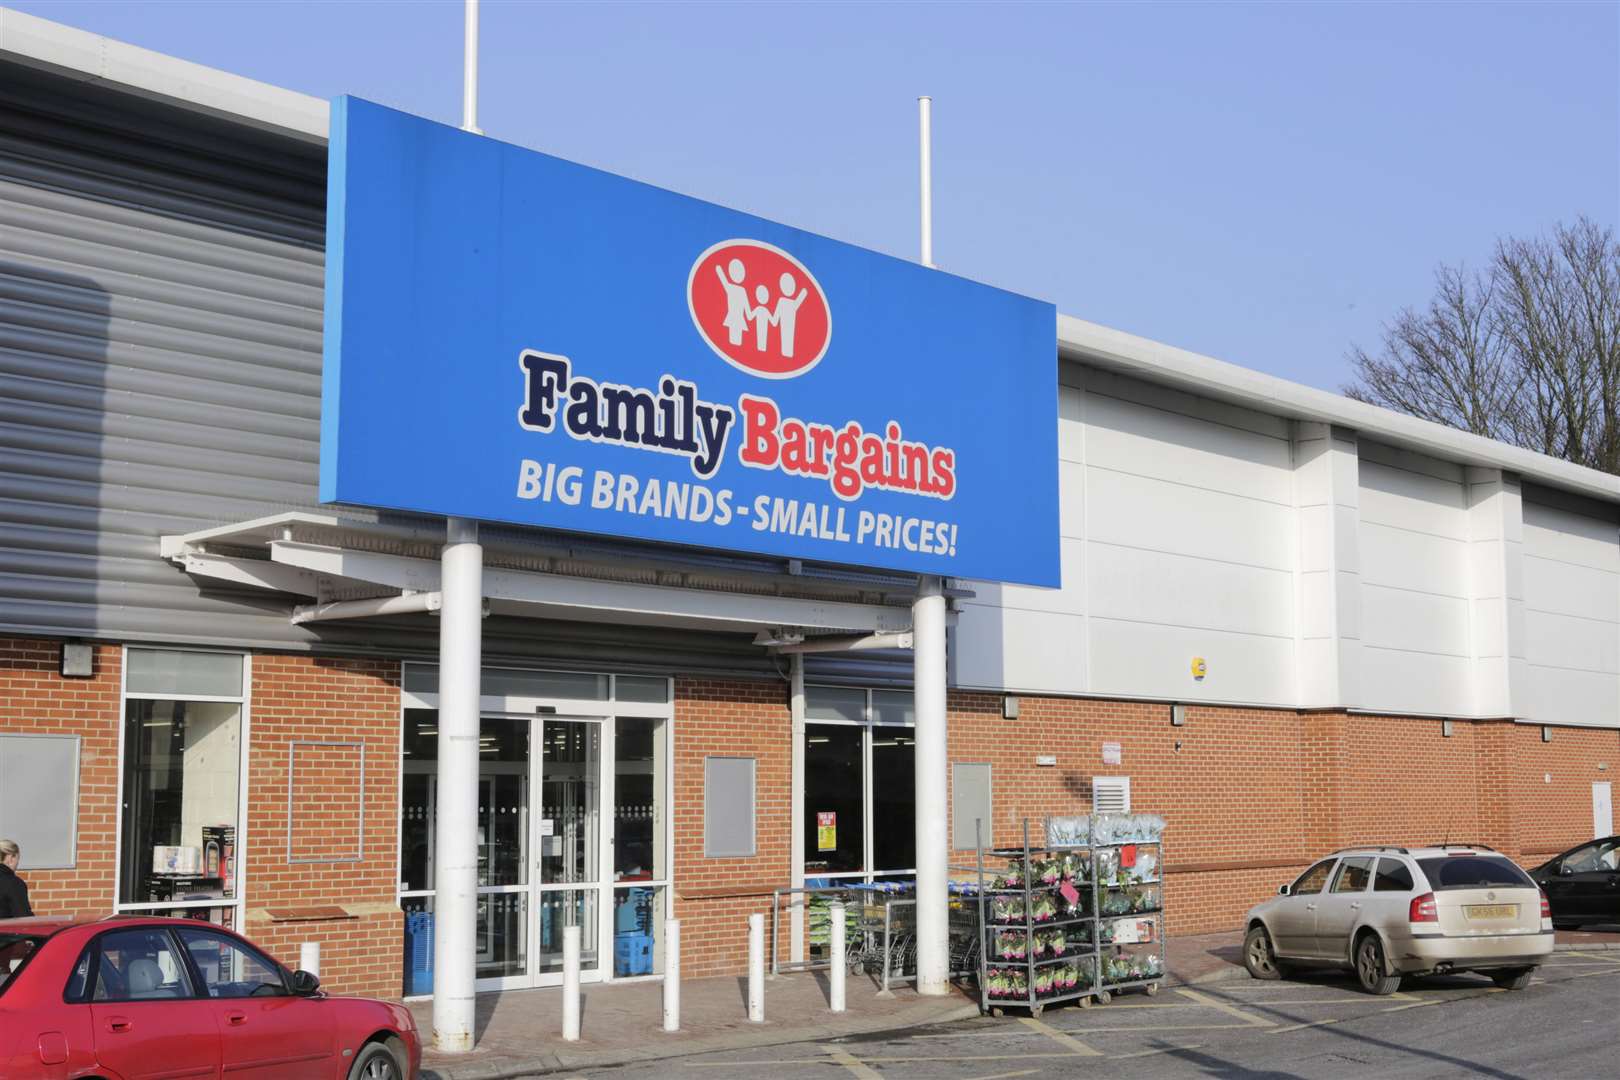 The toddler fell at the Family Bargains store in Maidstone